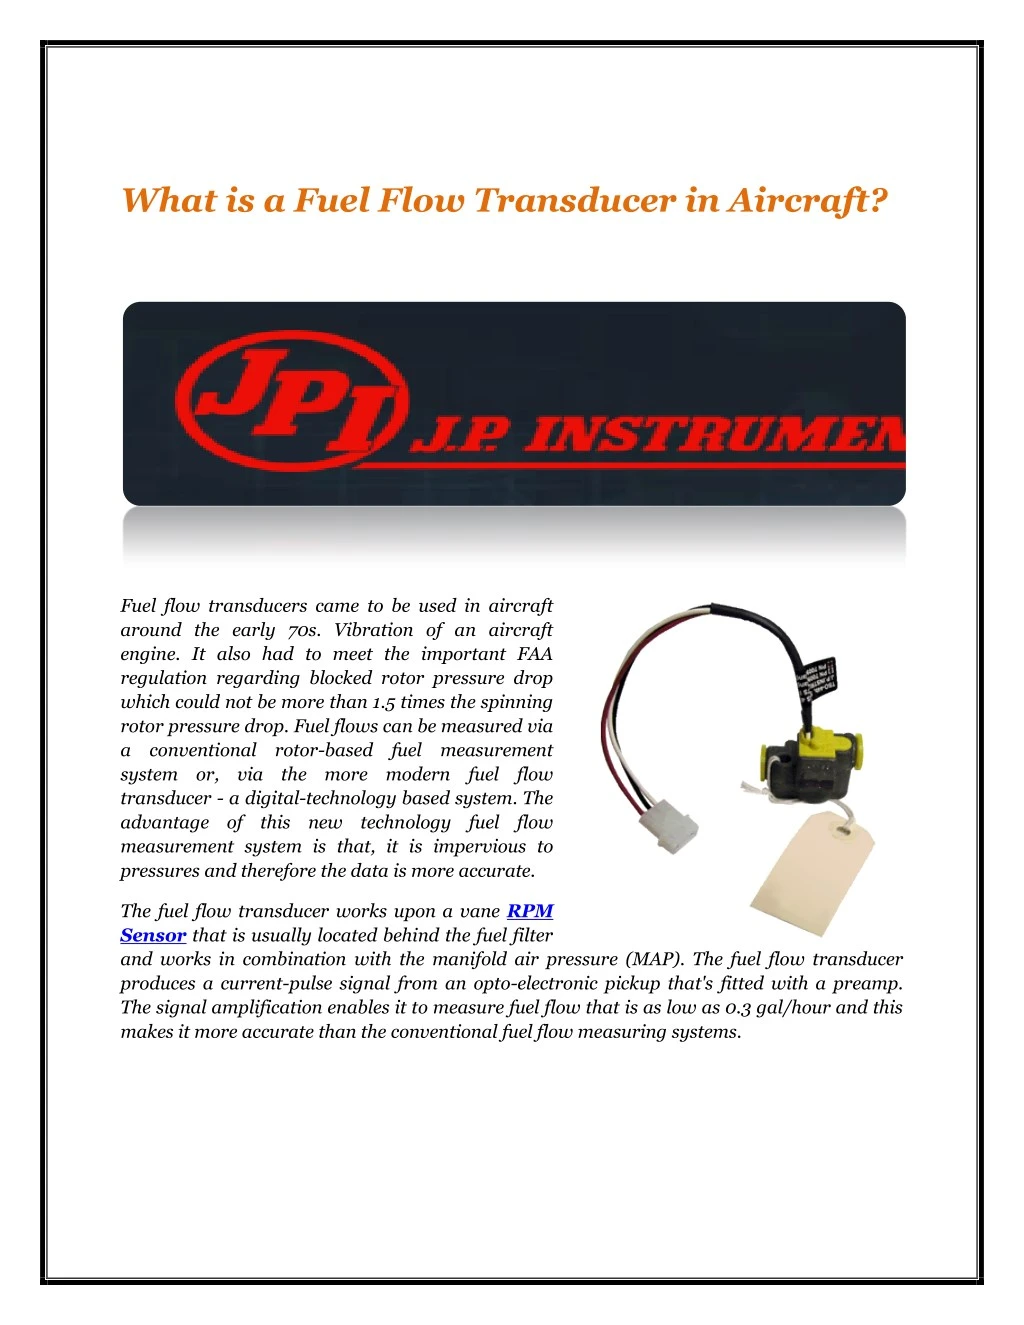 what is a fuel flow transducer in aircraft